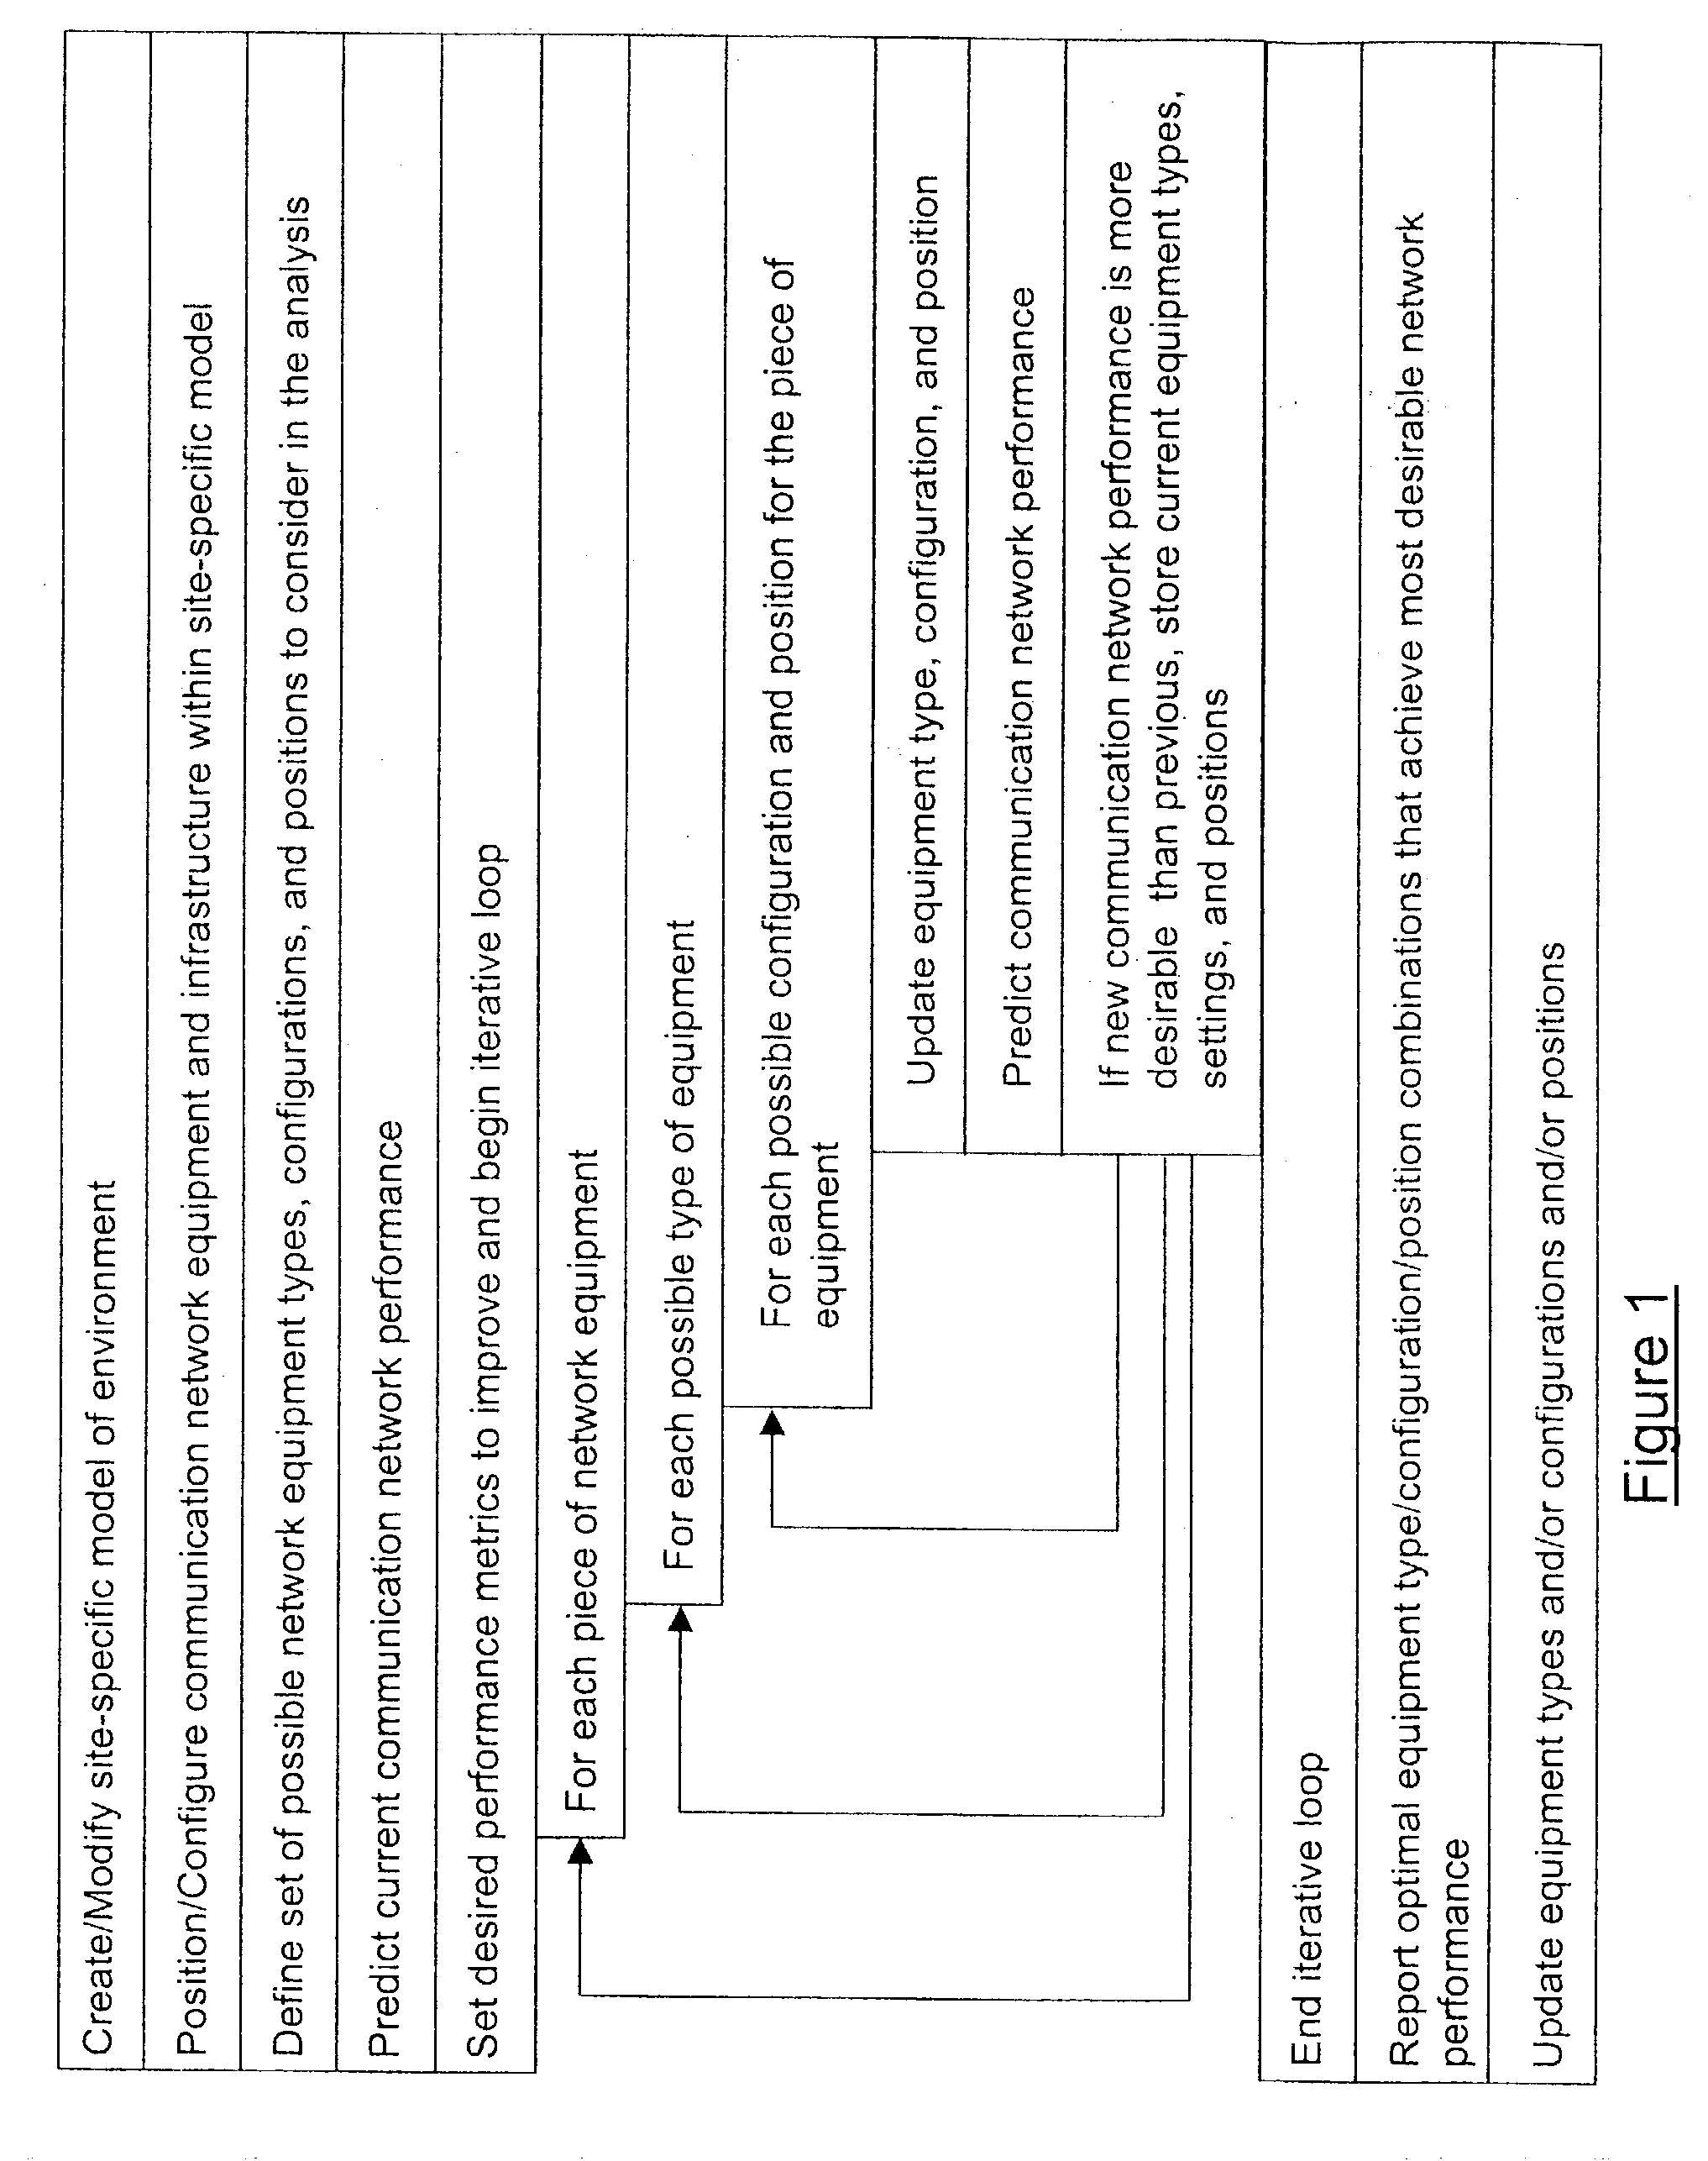 System and method for automated placement or configuration of equipment for obtaining desired network performance objectives